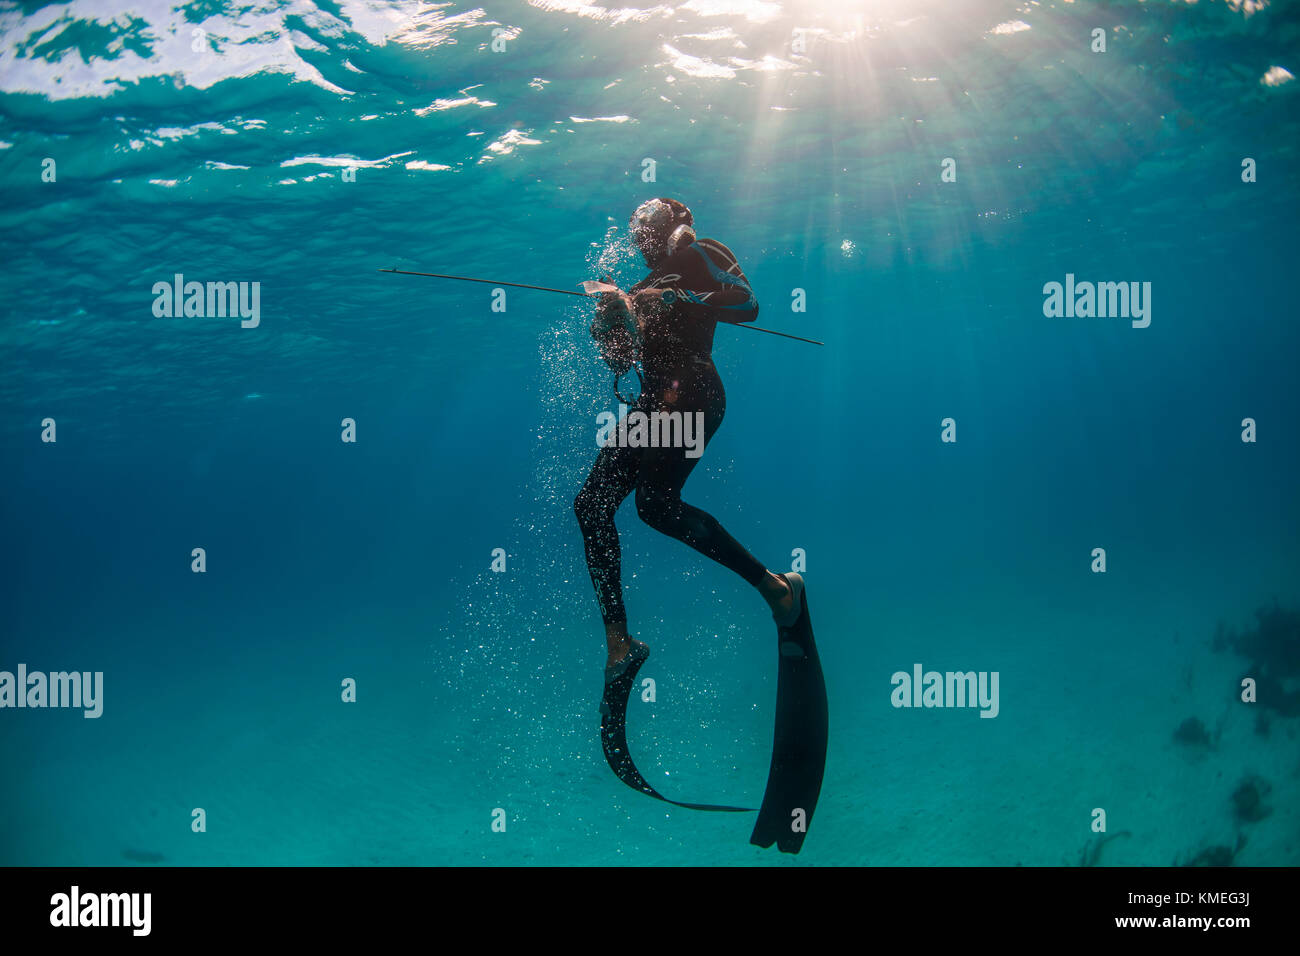 Diver surfacing after spearing hogfish while spearfishing in ocean, Clarence Town, Long Island, Bahamas Stock Photo